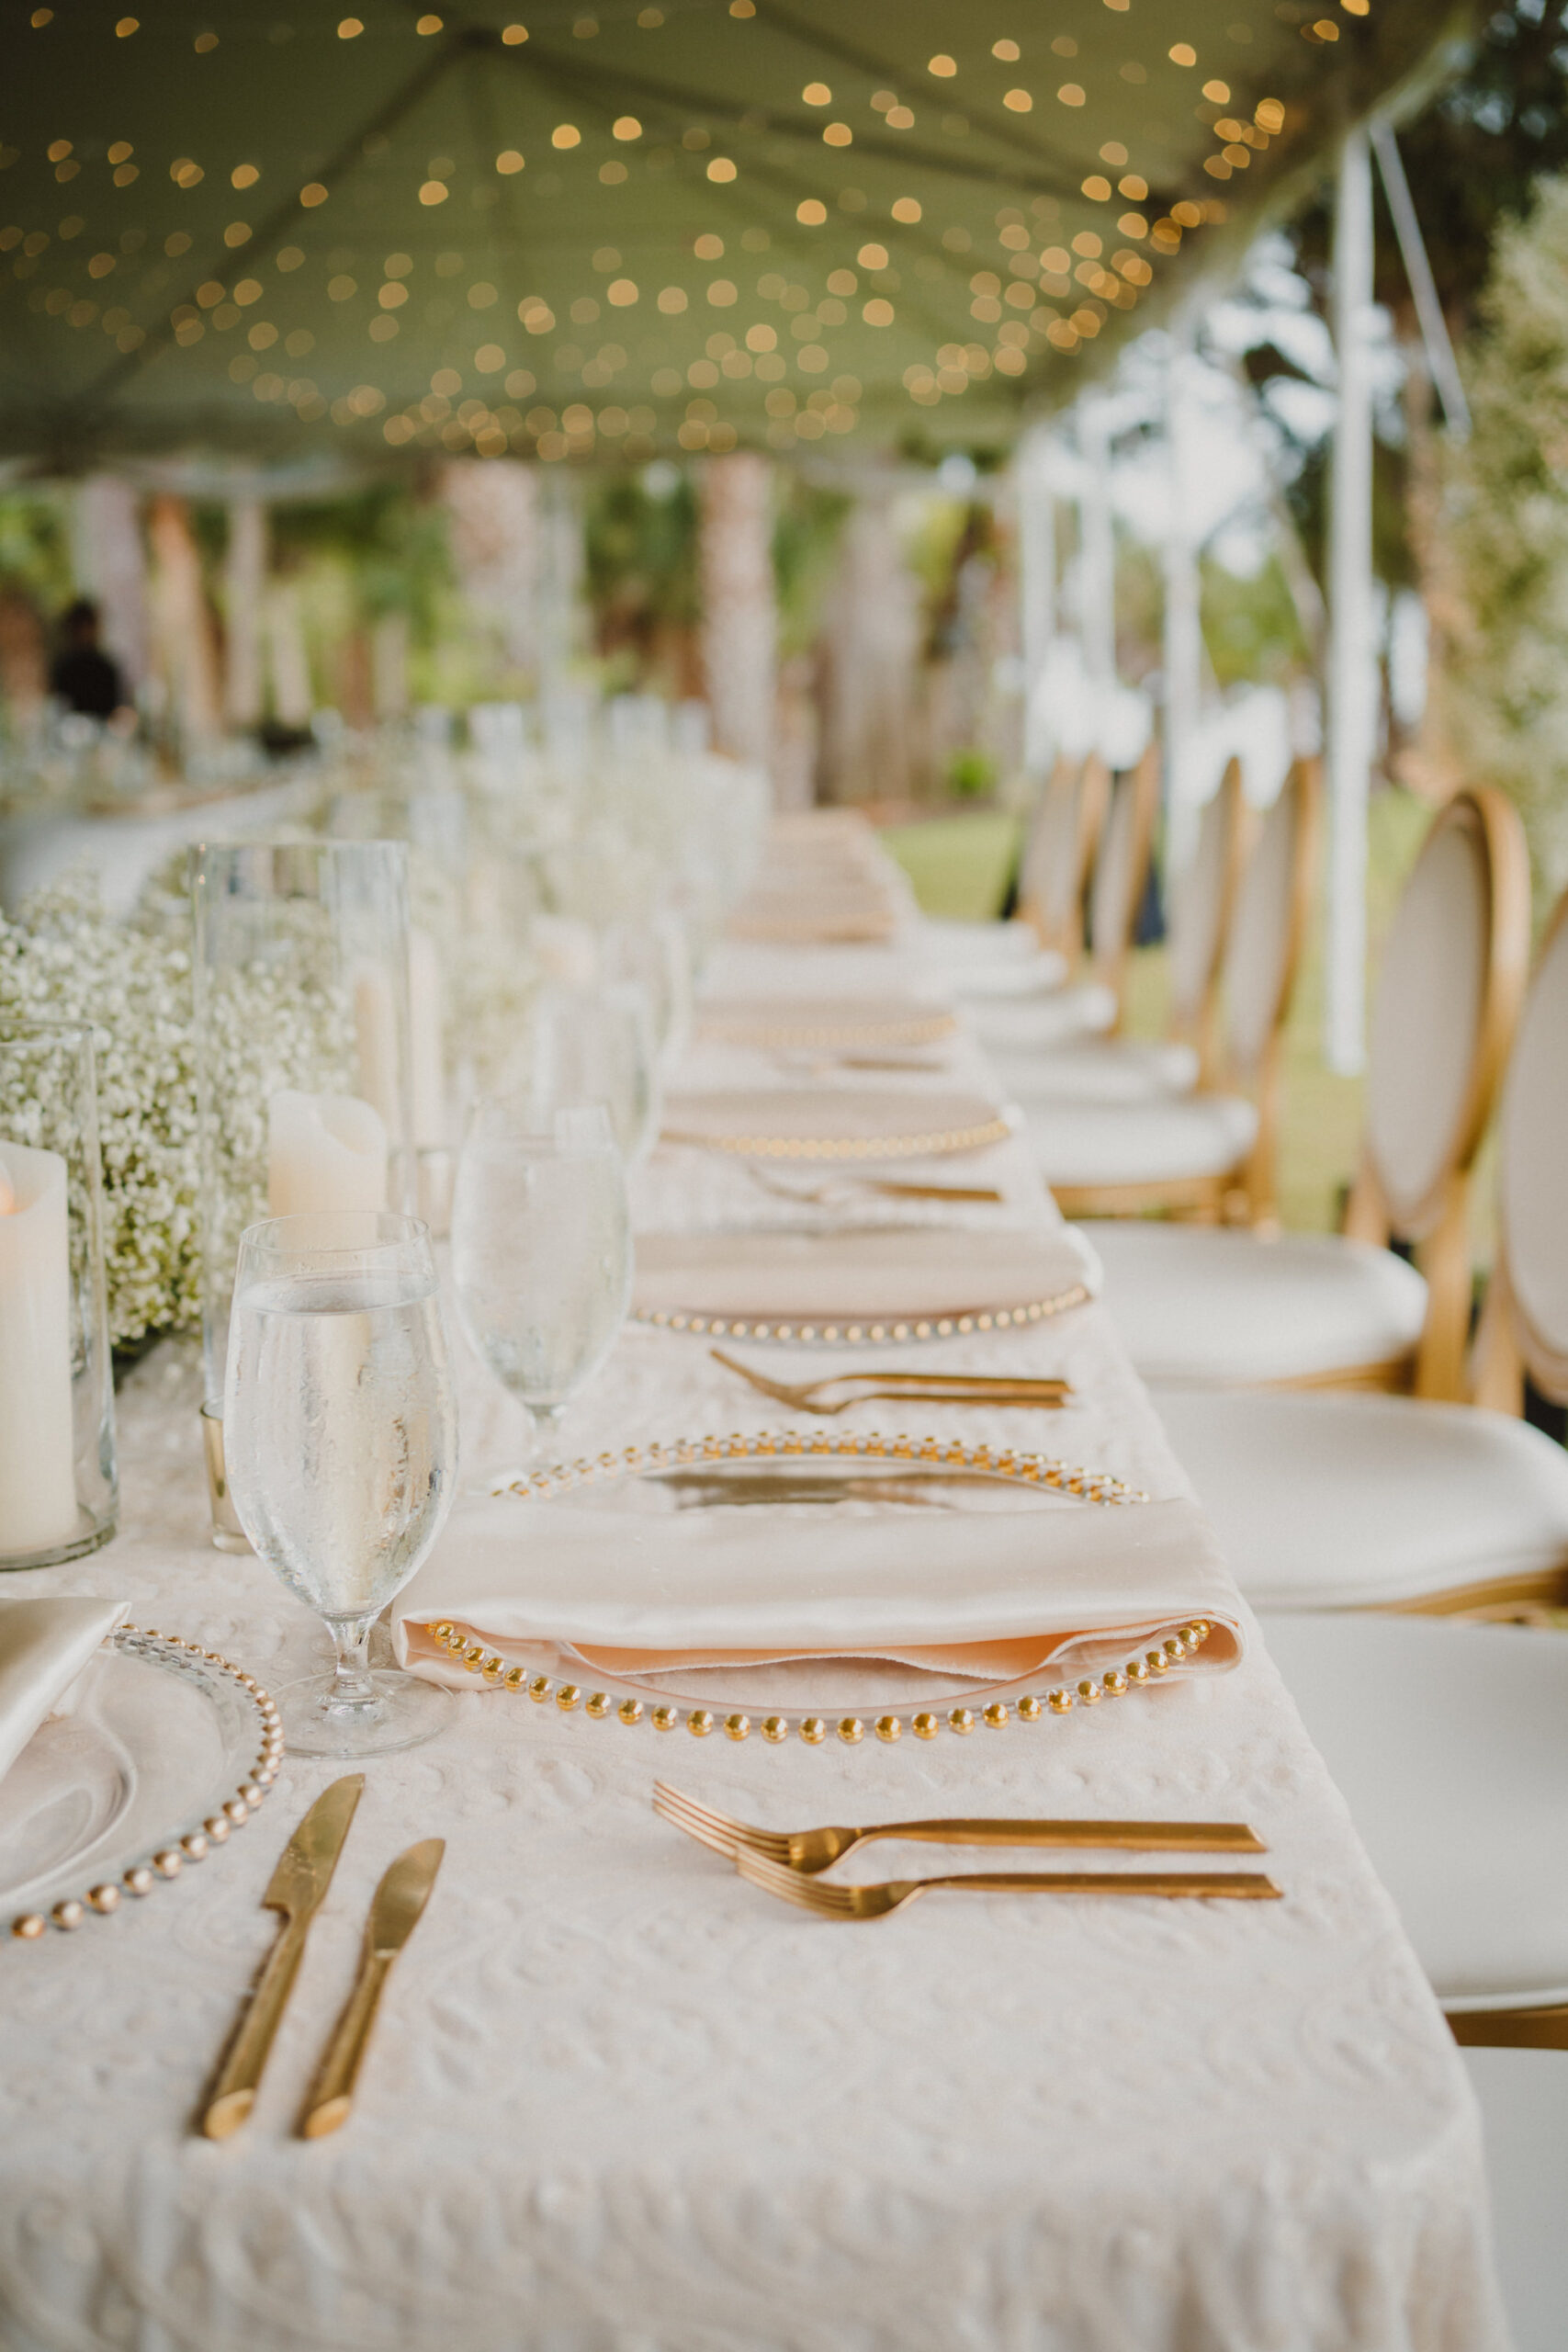 Timeless White and Gold Wedding Reception Table Setting | Gold Beaded Chargers and Flatware | Tampa Bay Kate Ryan Event Rentals